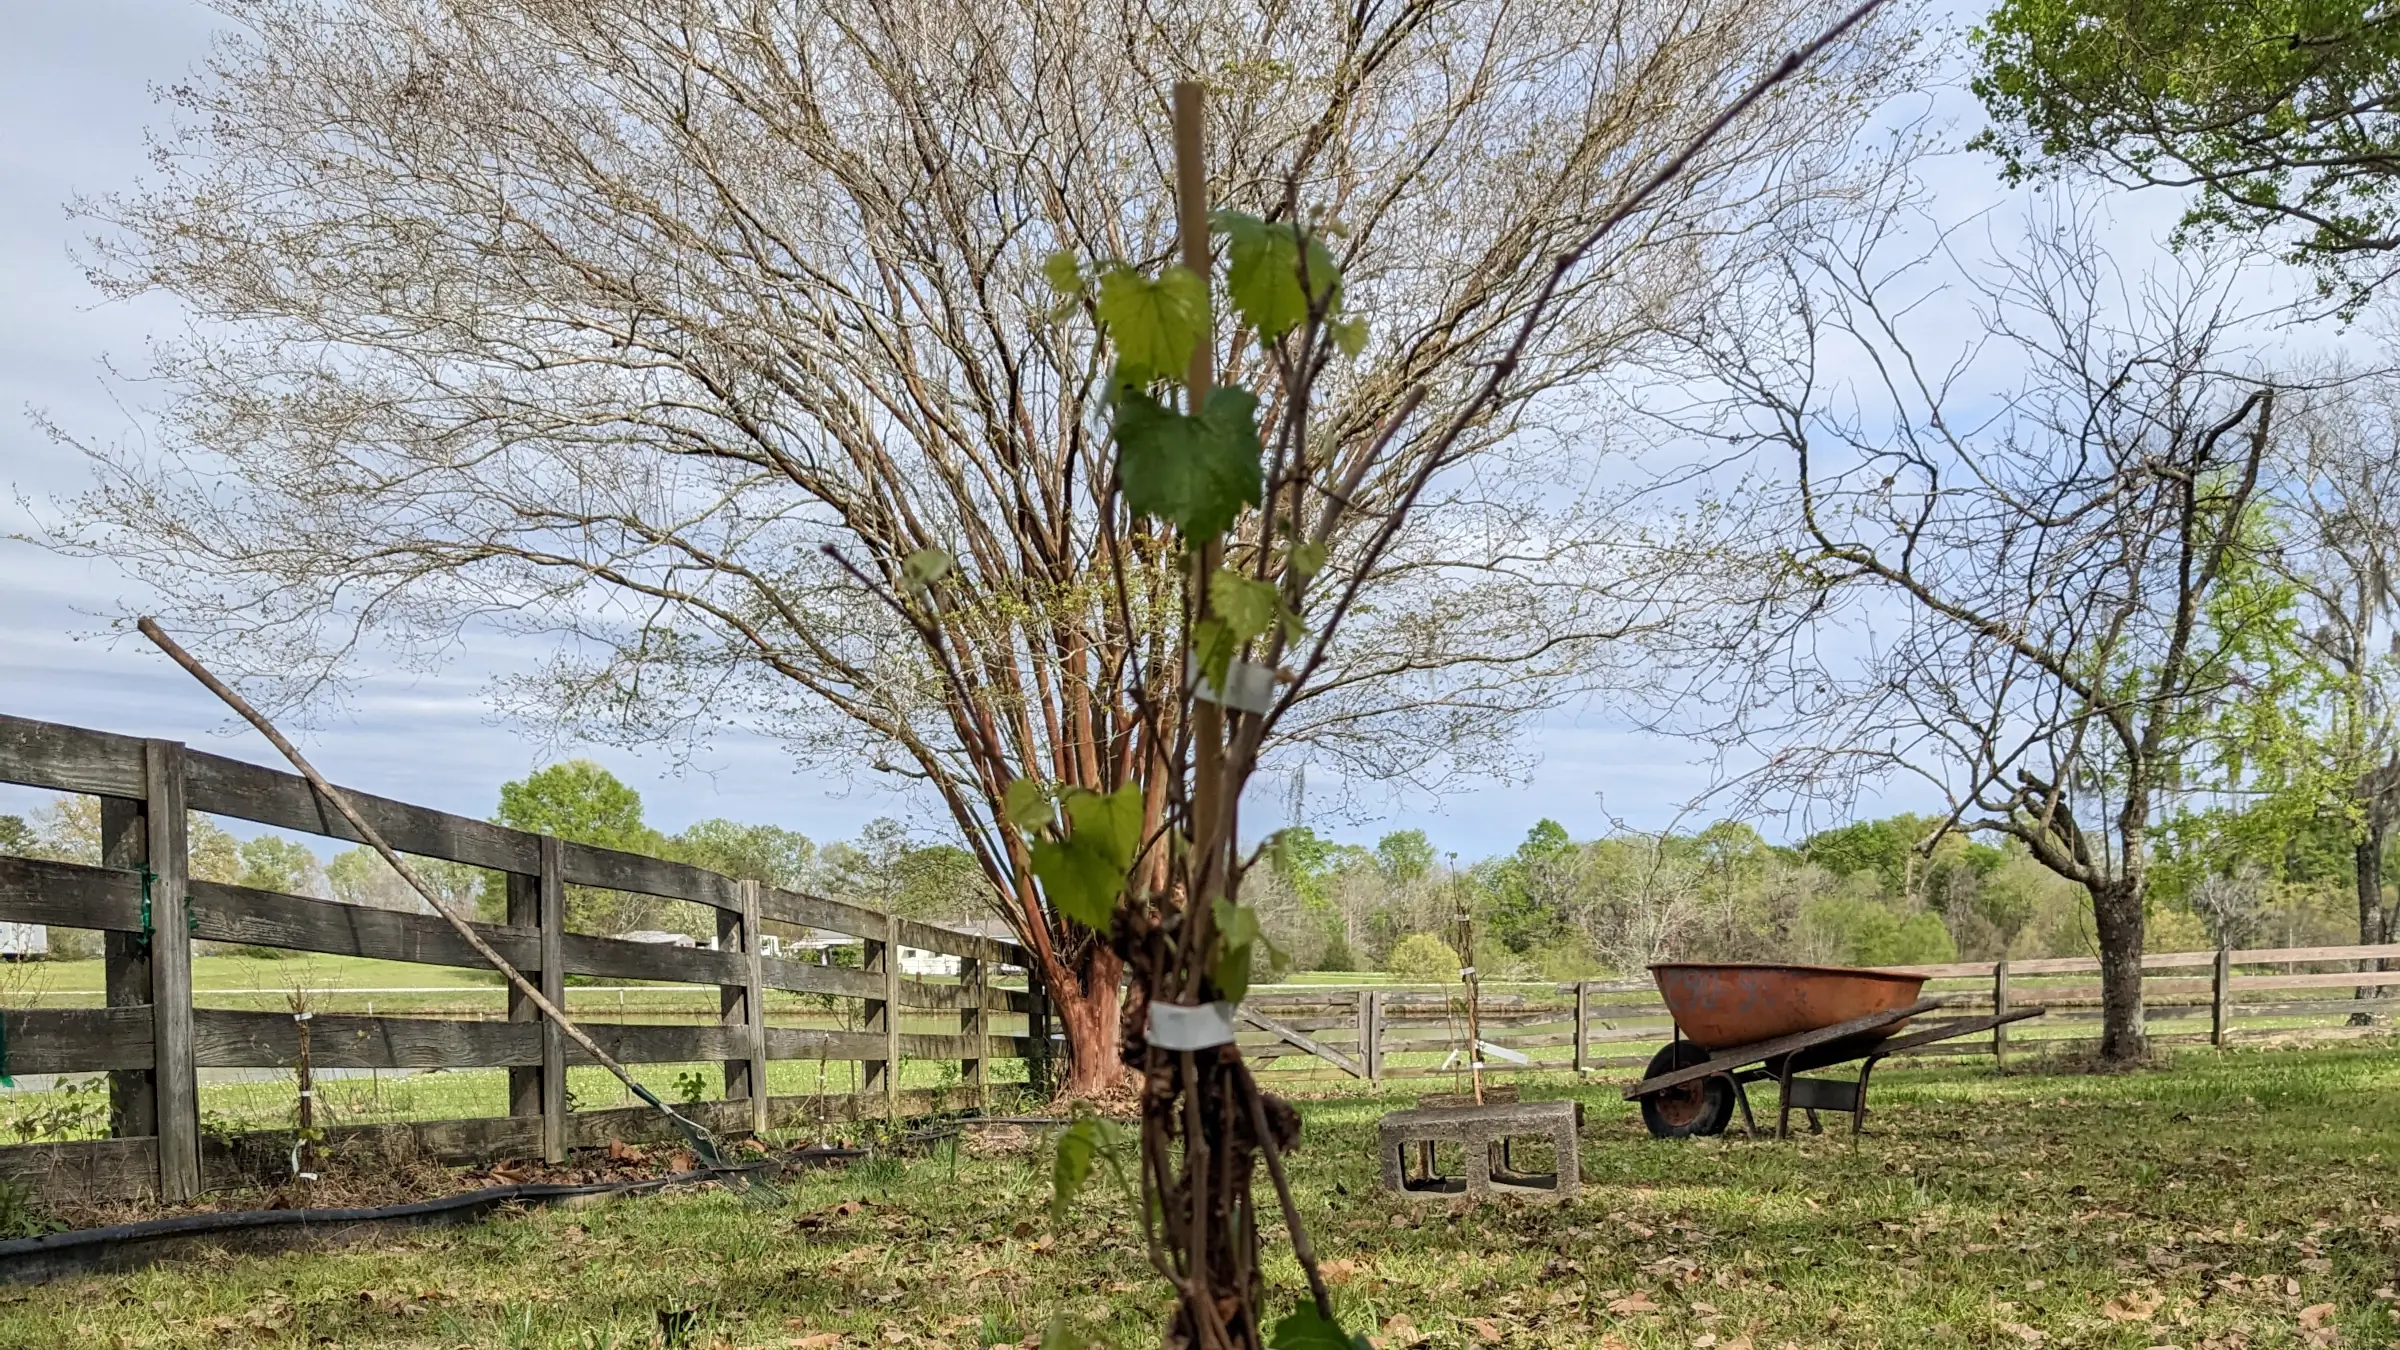 Muscadines planted alongside an old wooden fence.